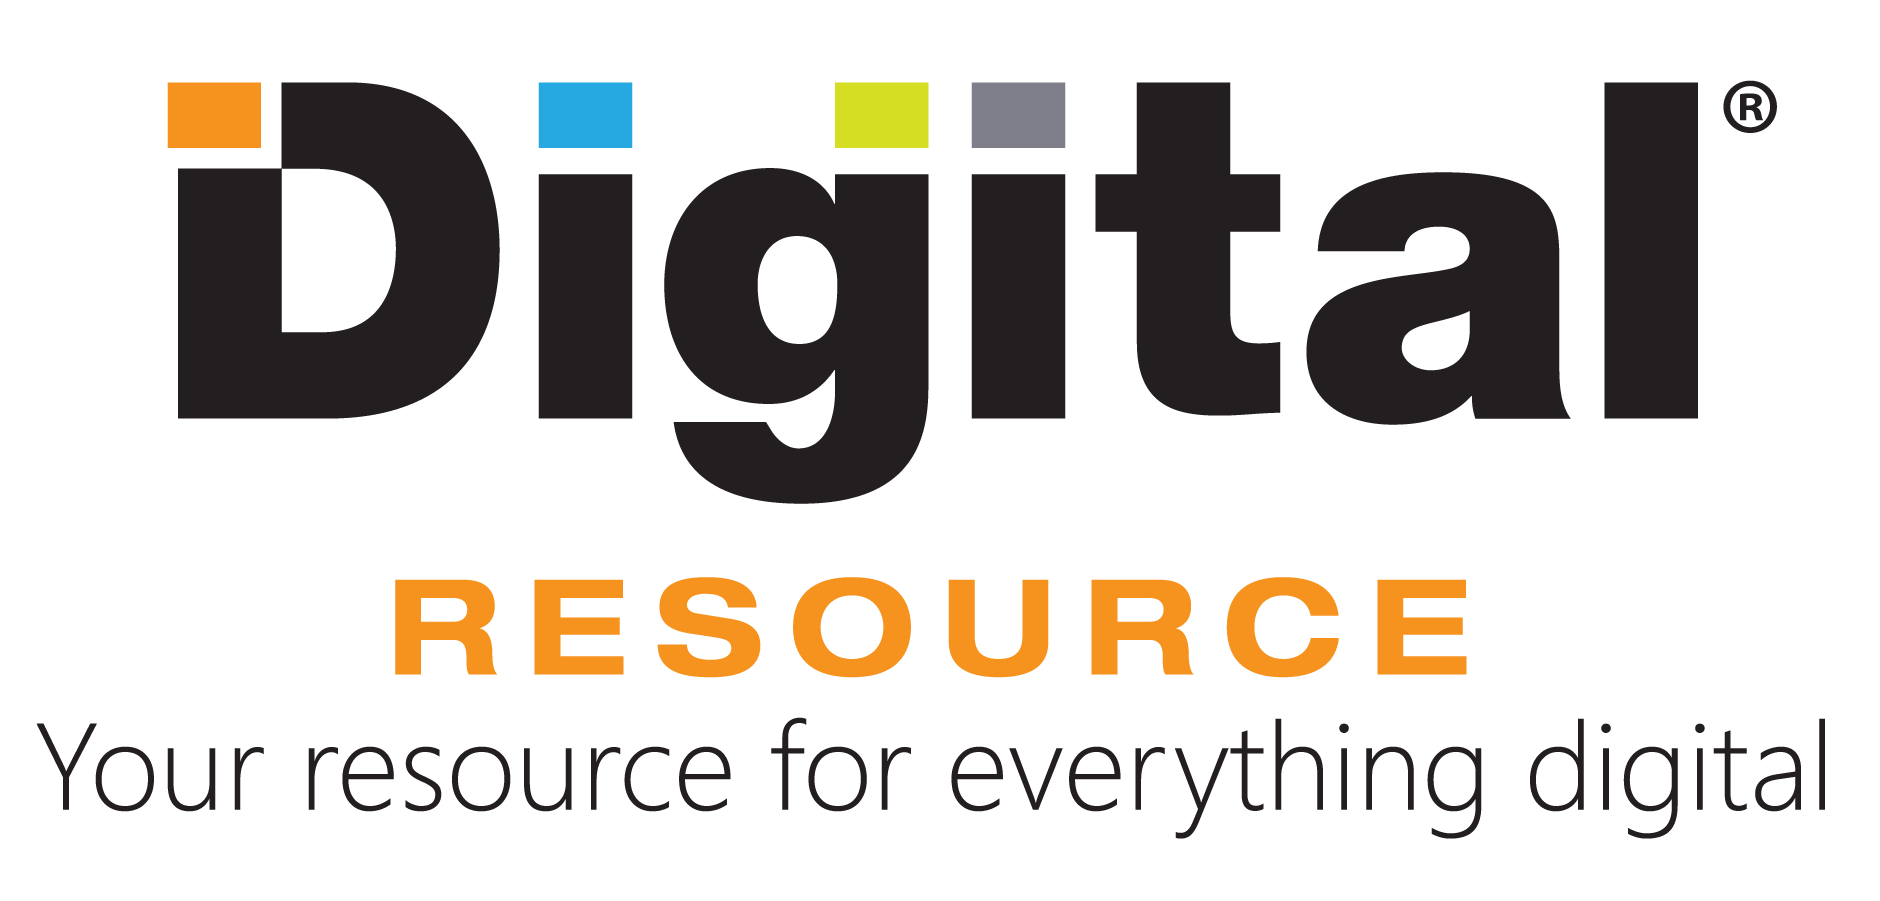 Digital Resource - Your resource for everything digital